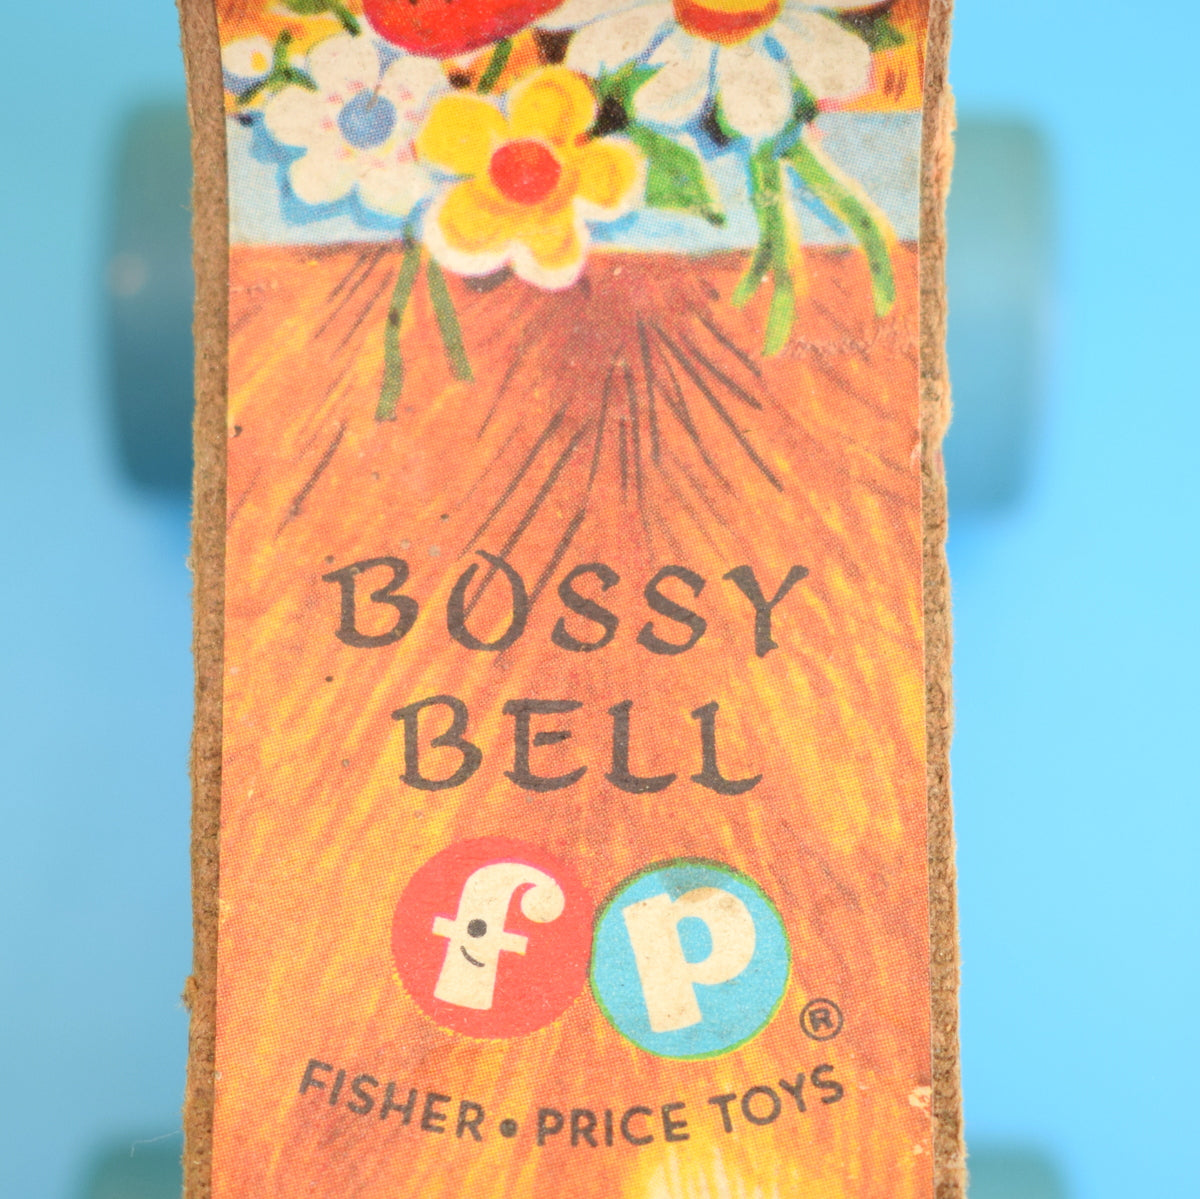 Vintage 1950s Fisher Price - Bossy Bell Cow - Classic Toy - Wooden - USA